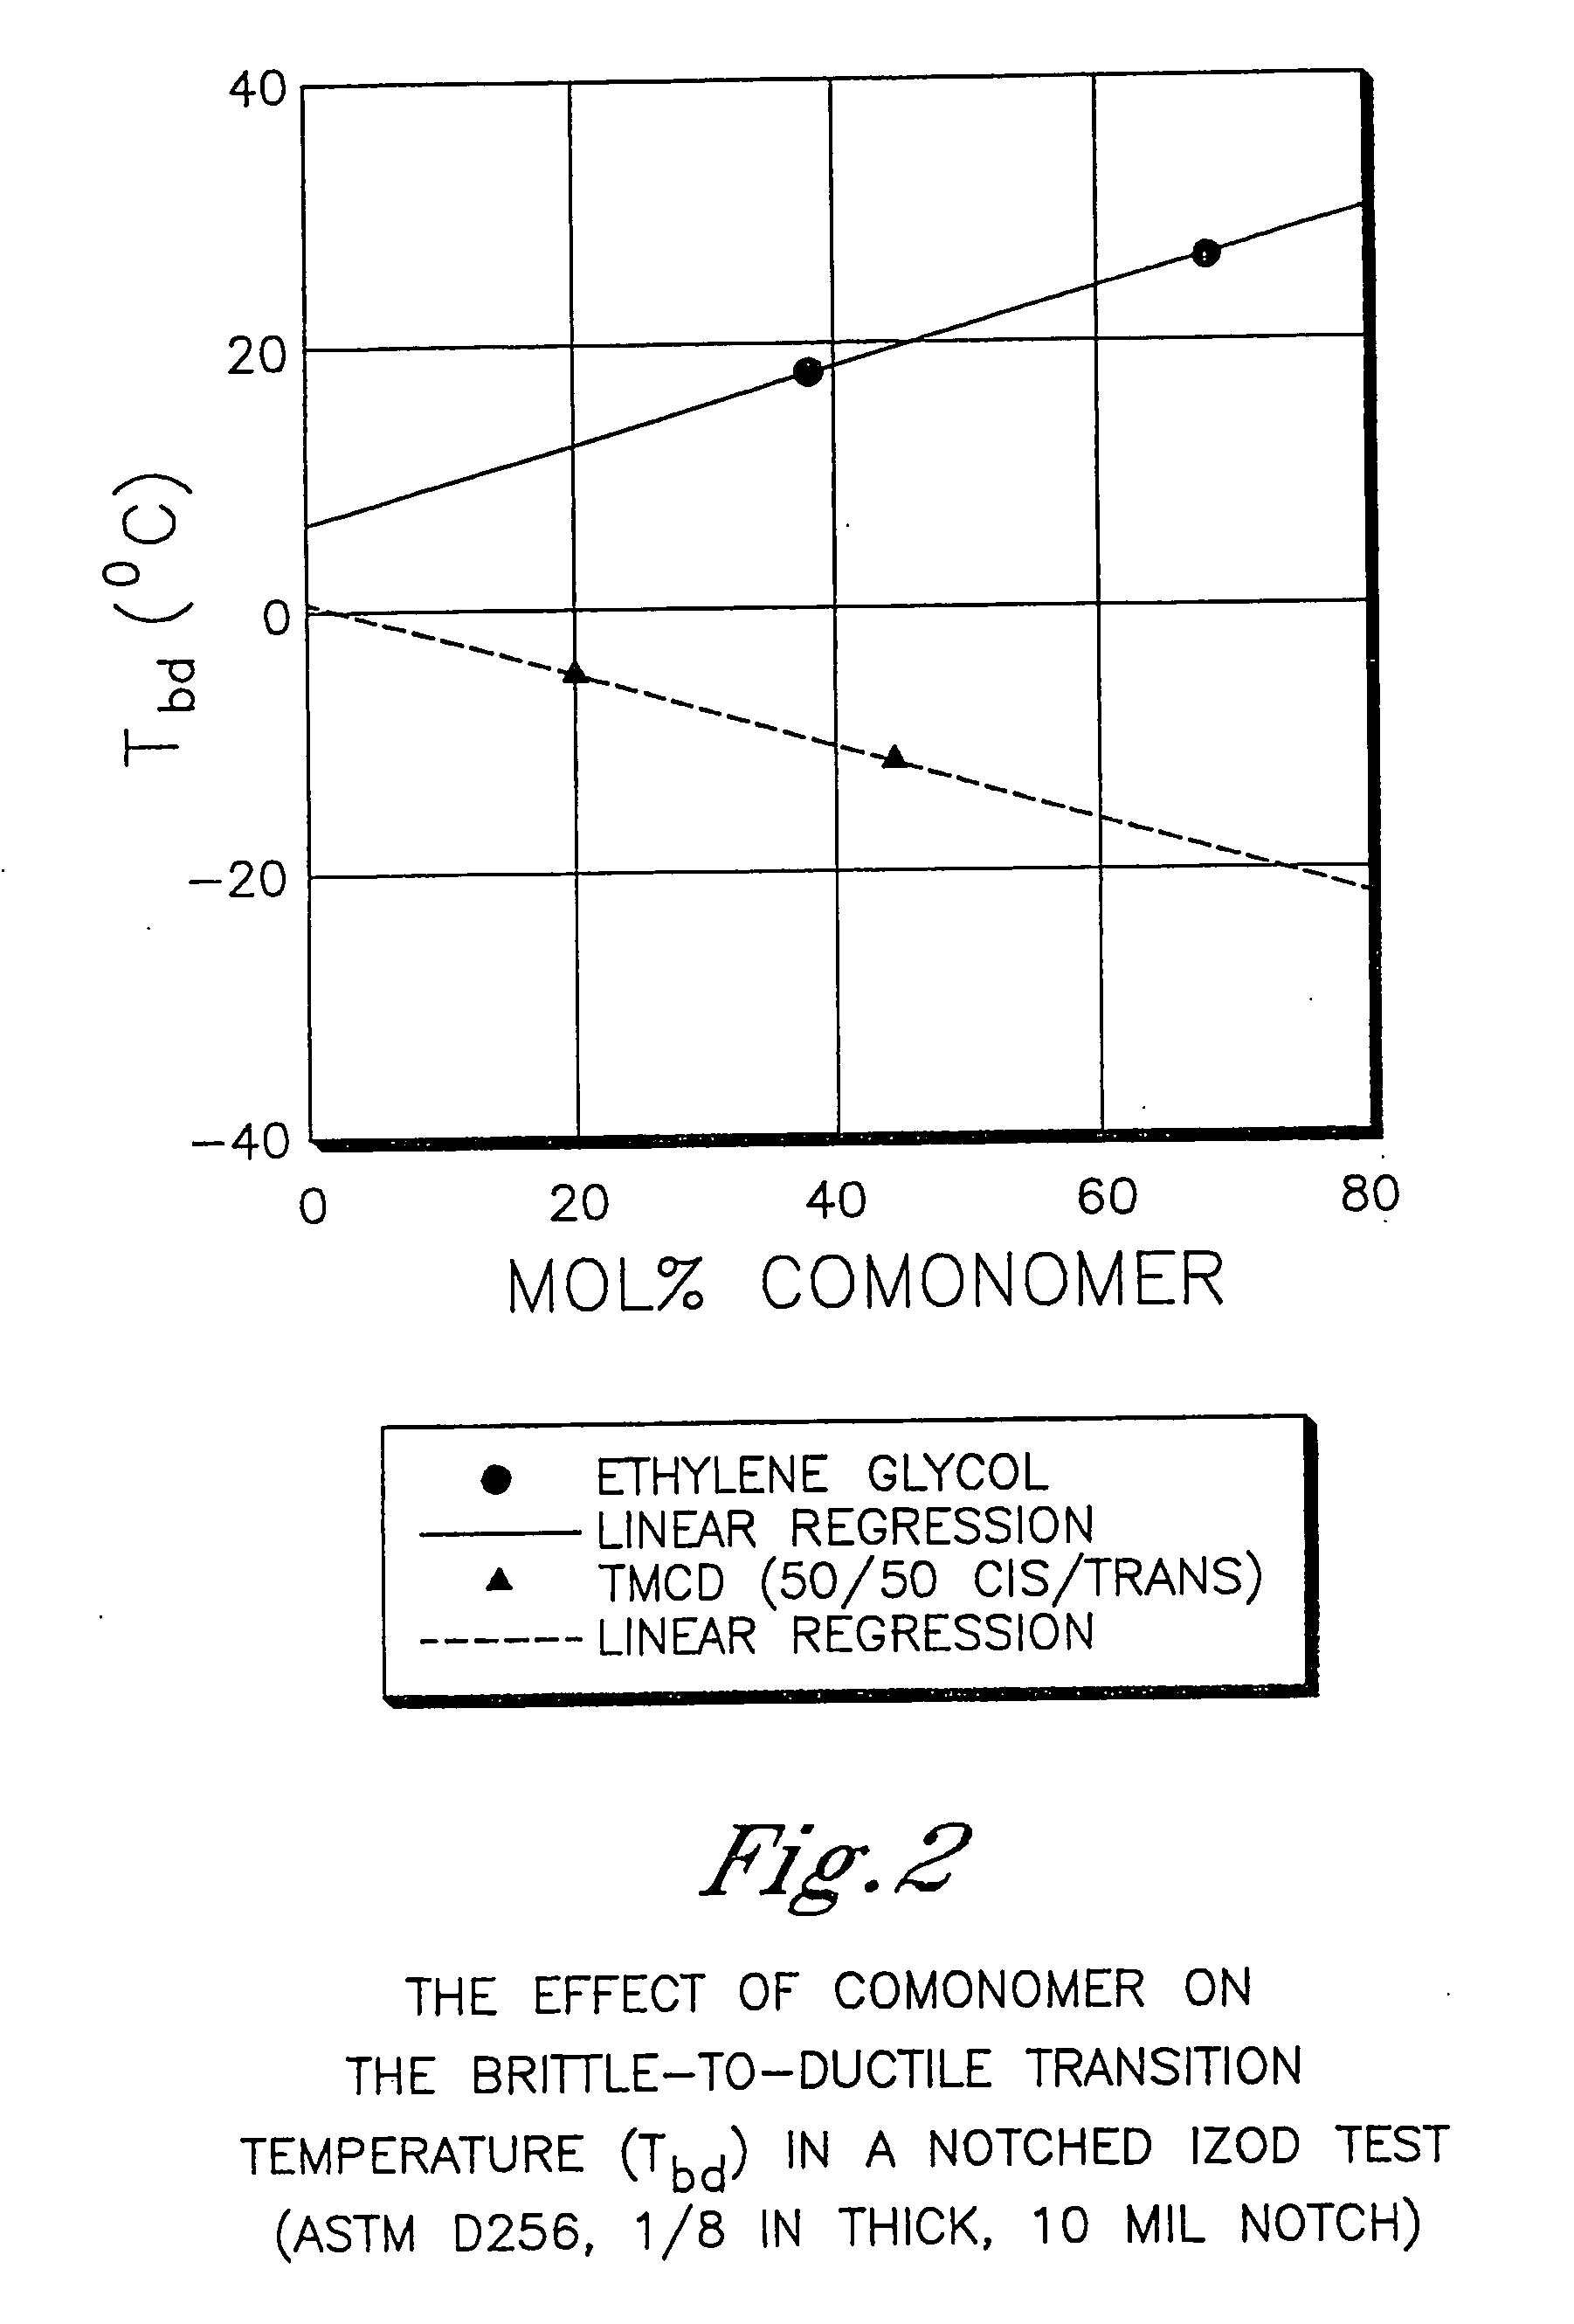 Retort containers comprising polyester compositions formed from 2,2,4,4-tetramethyl-1,3-cyclobutanediol and 1,4-cyclohexanedimethanol